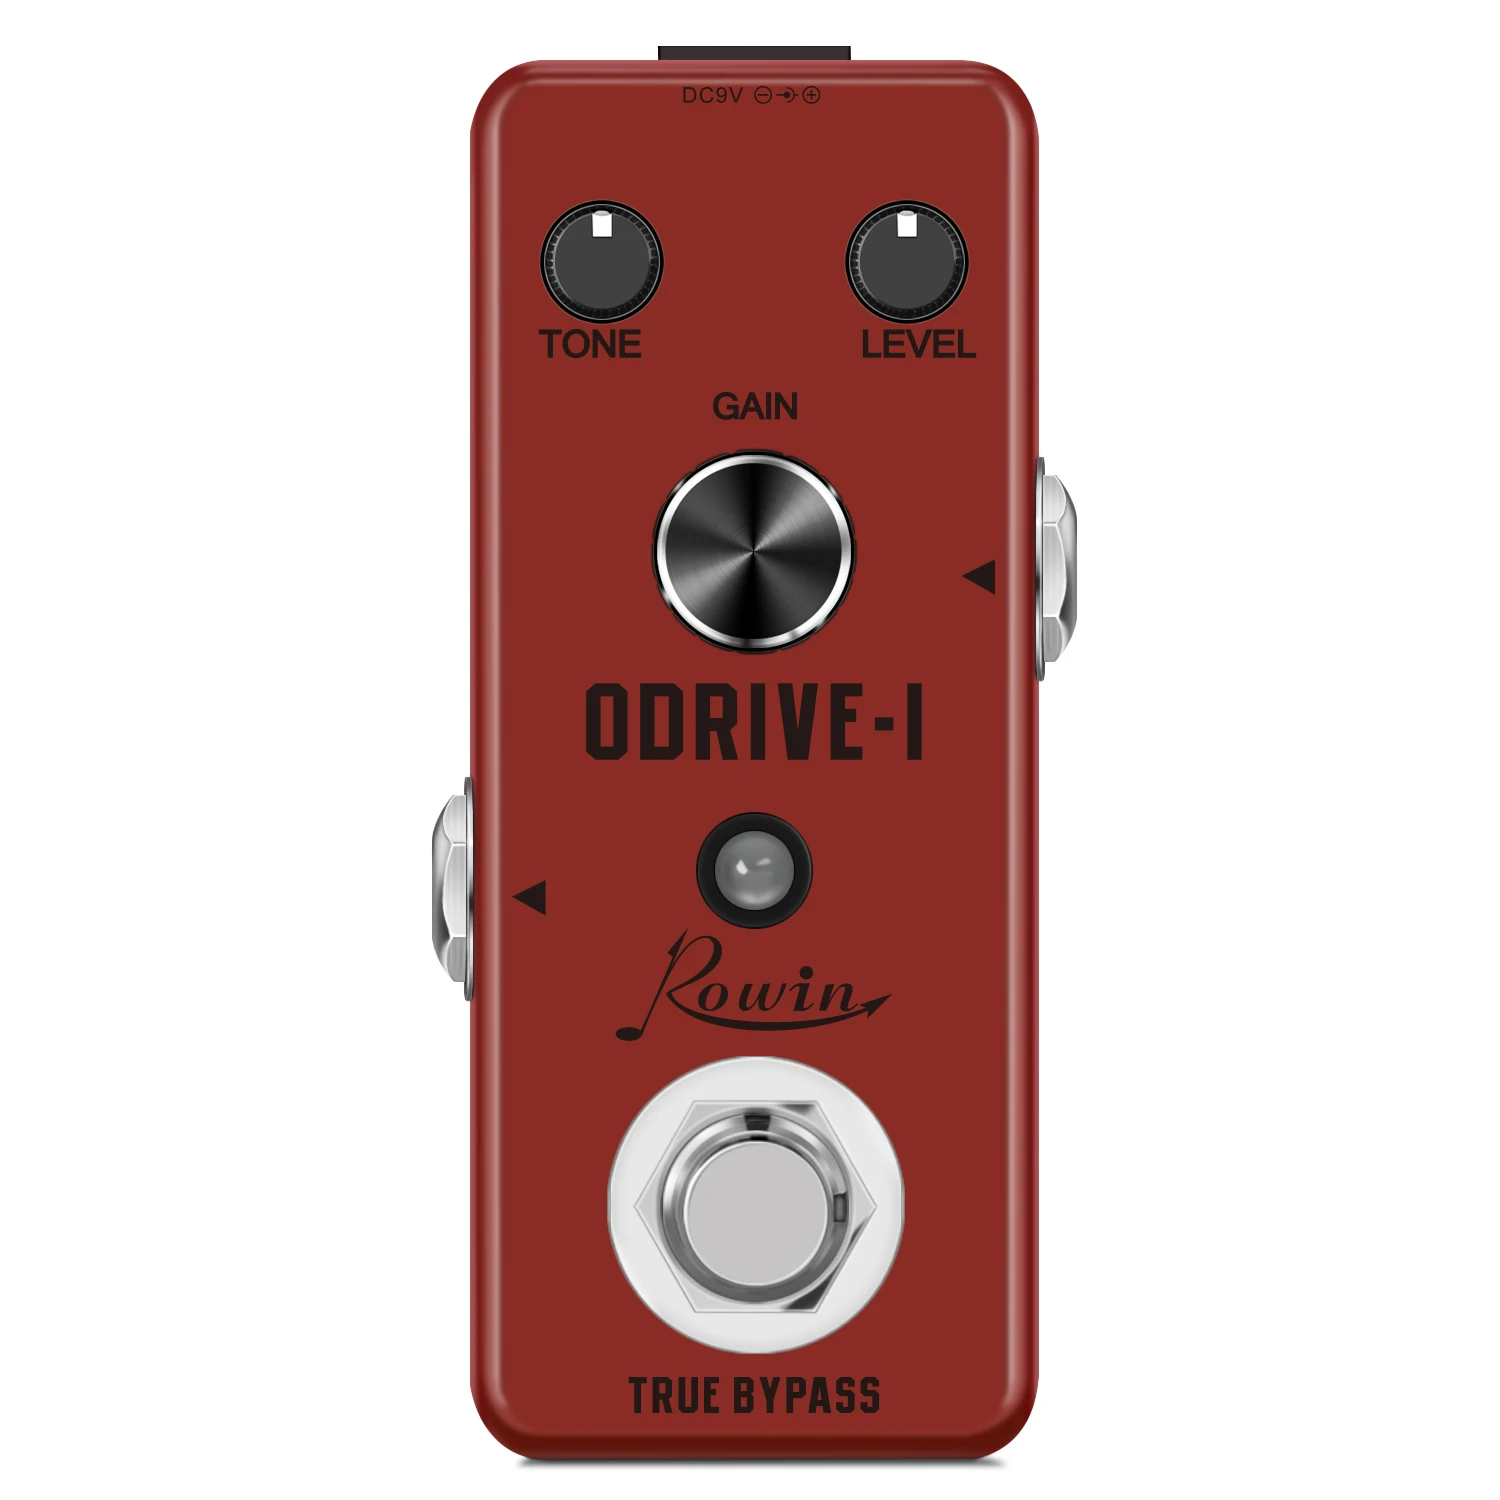 

Rowin LEF-302A Guitar Overdrive Pedal Analog Classic Blues ODrive-1 Effect Pedals